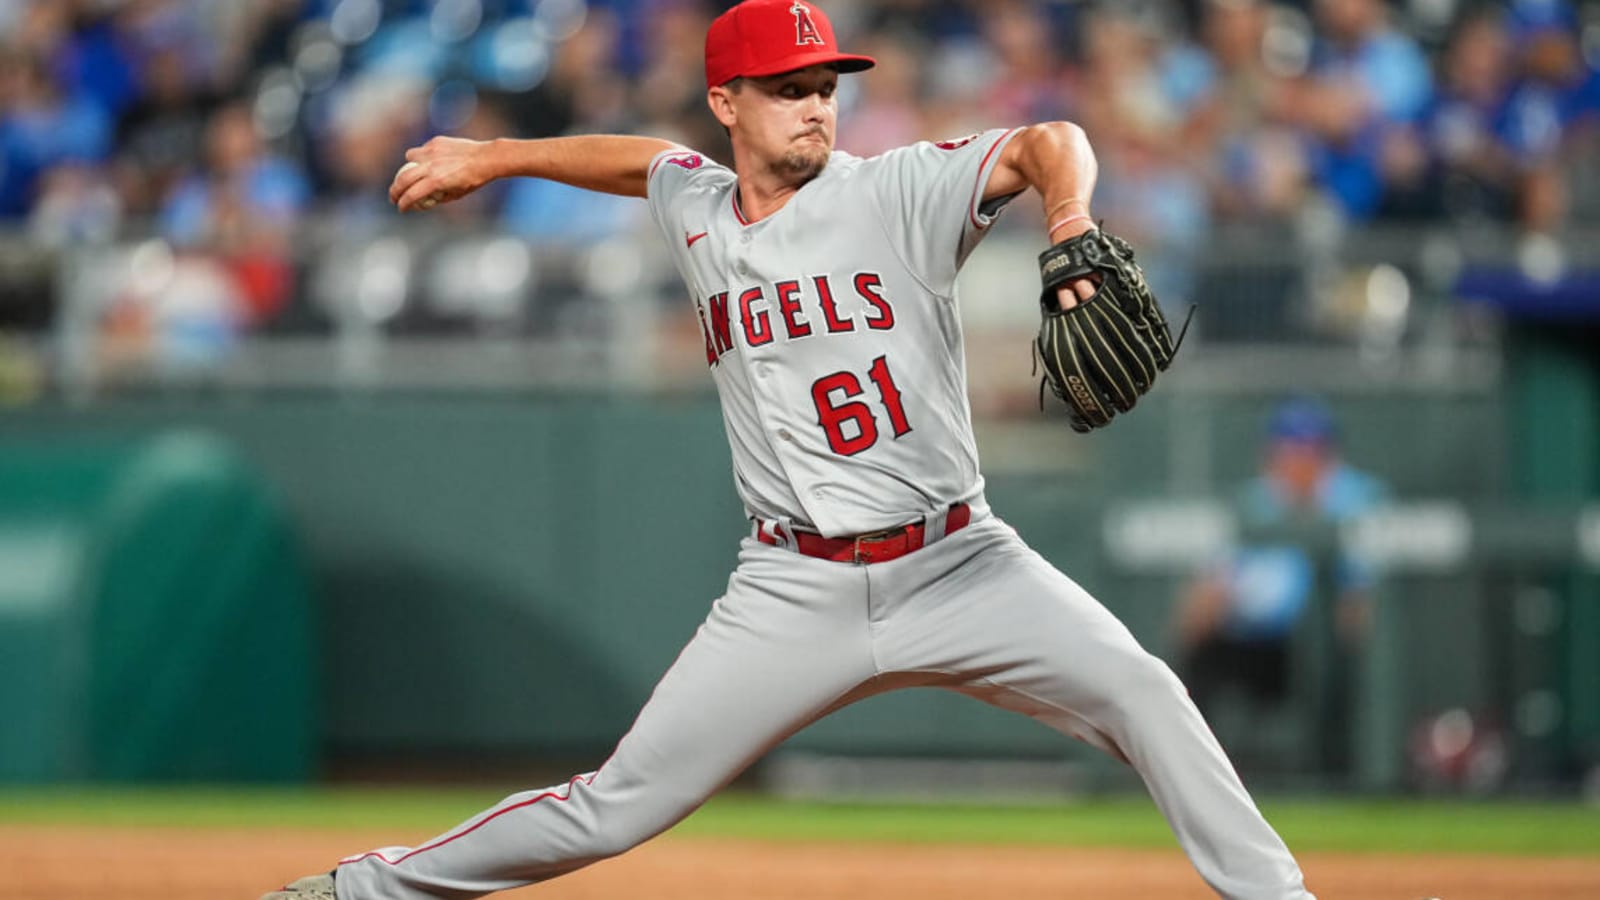  Giants sign former Angels reliever to big-league contract